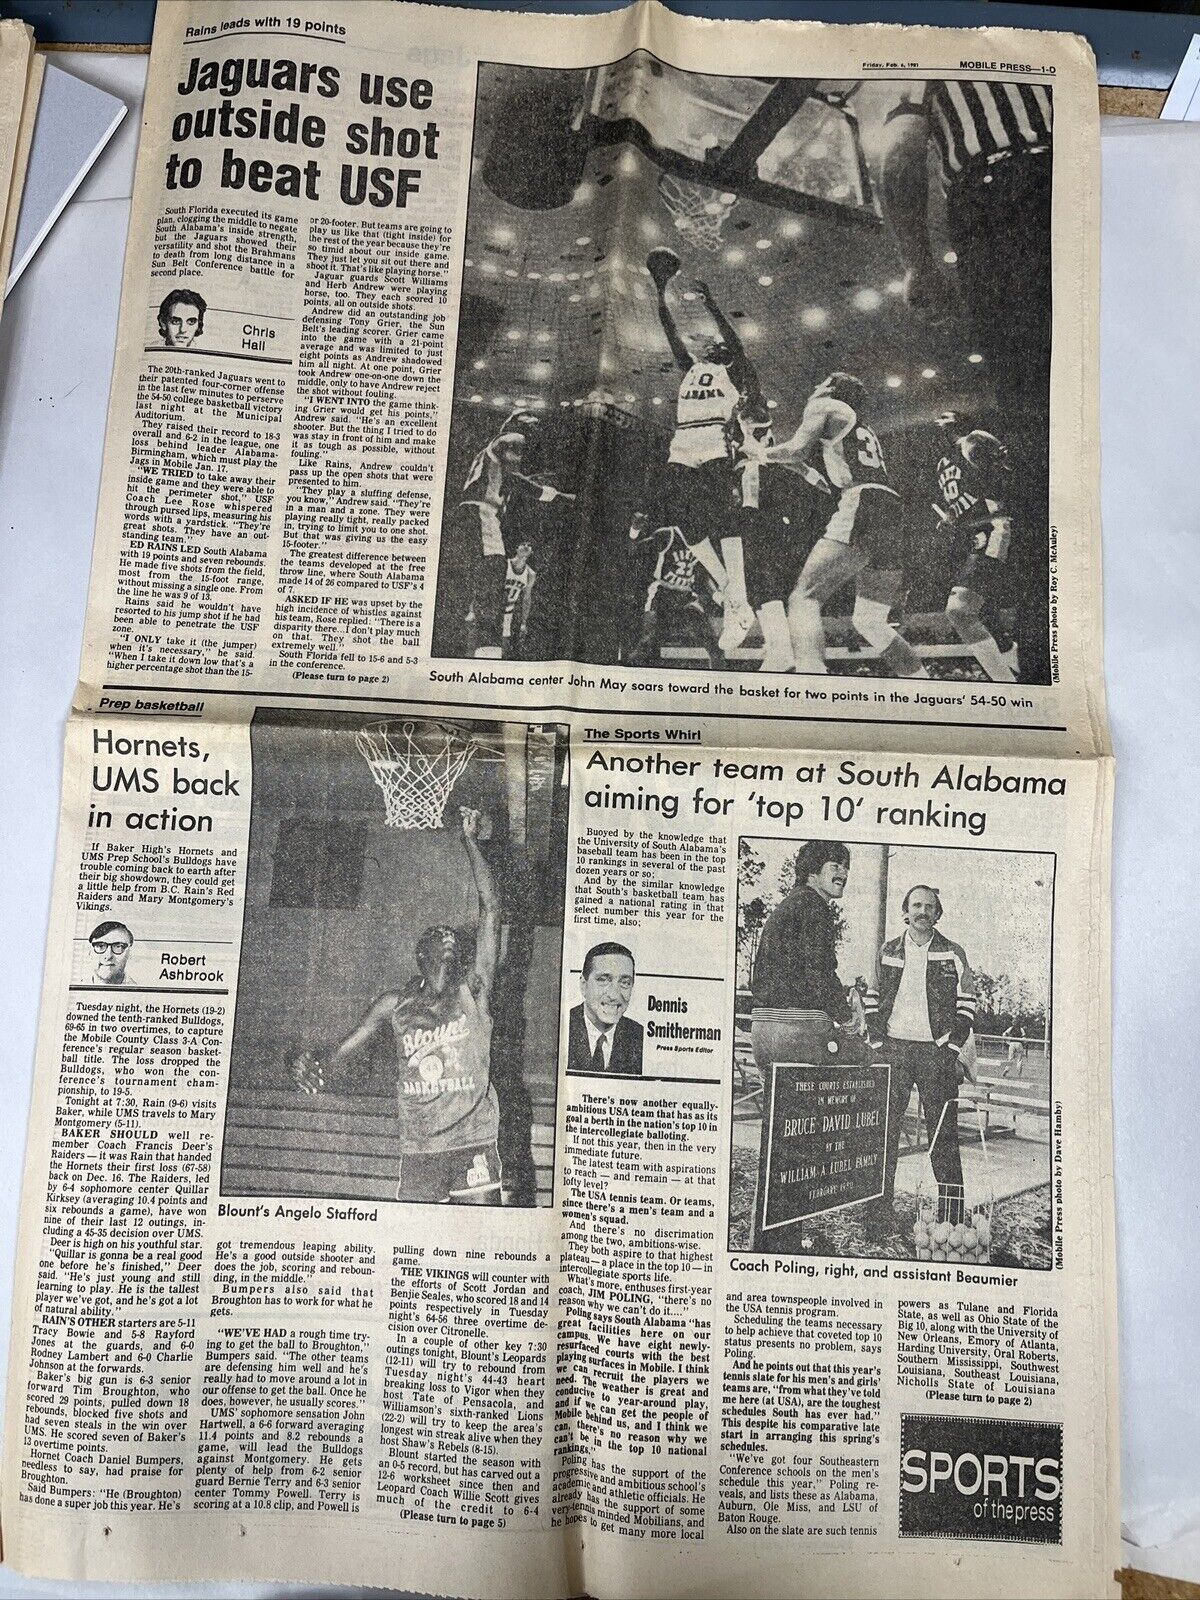 Mobile Press Register Partial Newspaper,Sports Section, from Feb 6, 1981